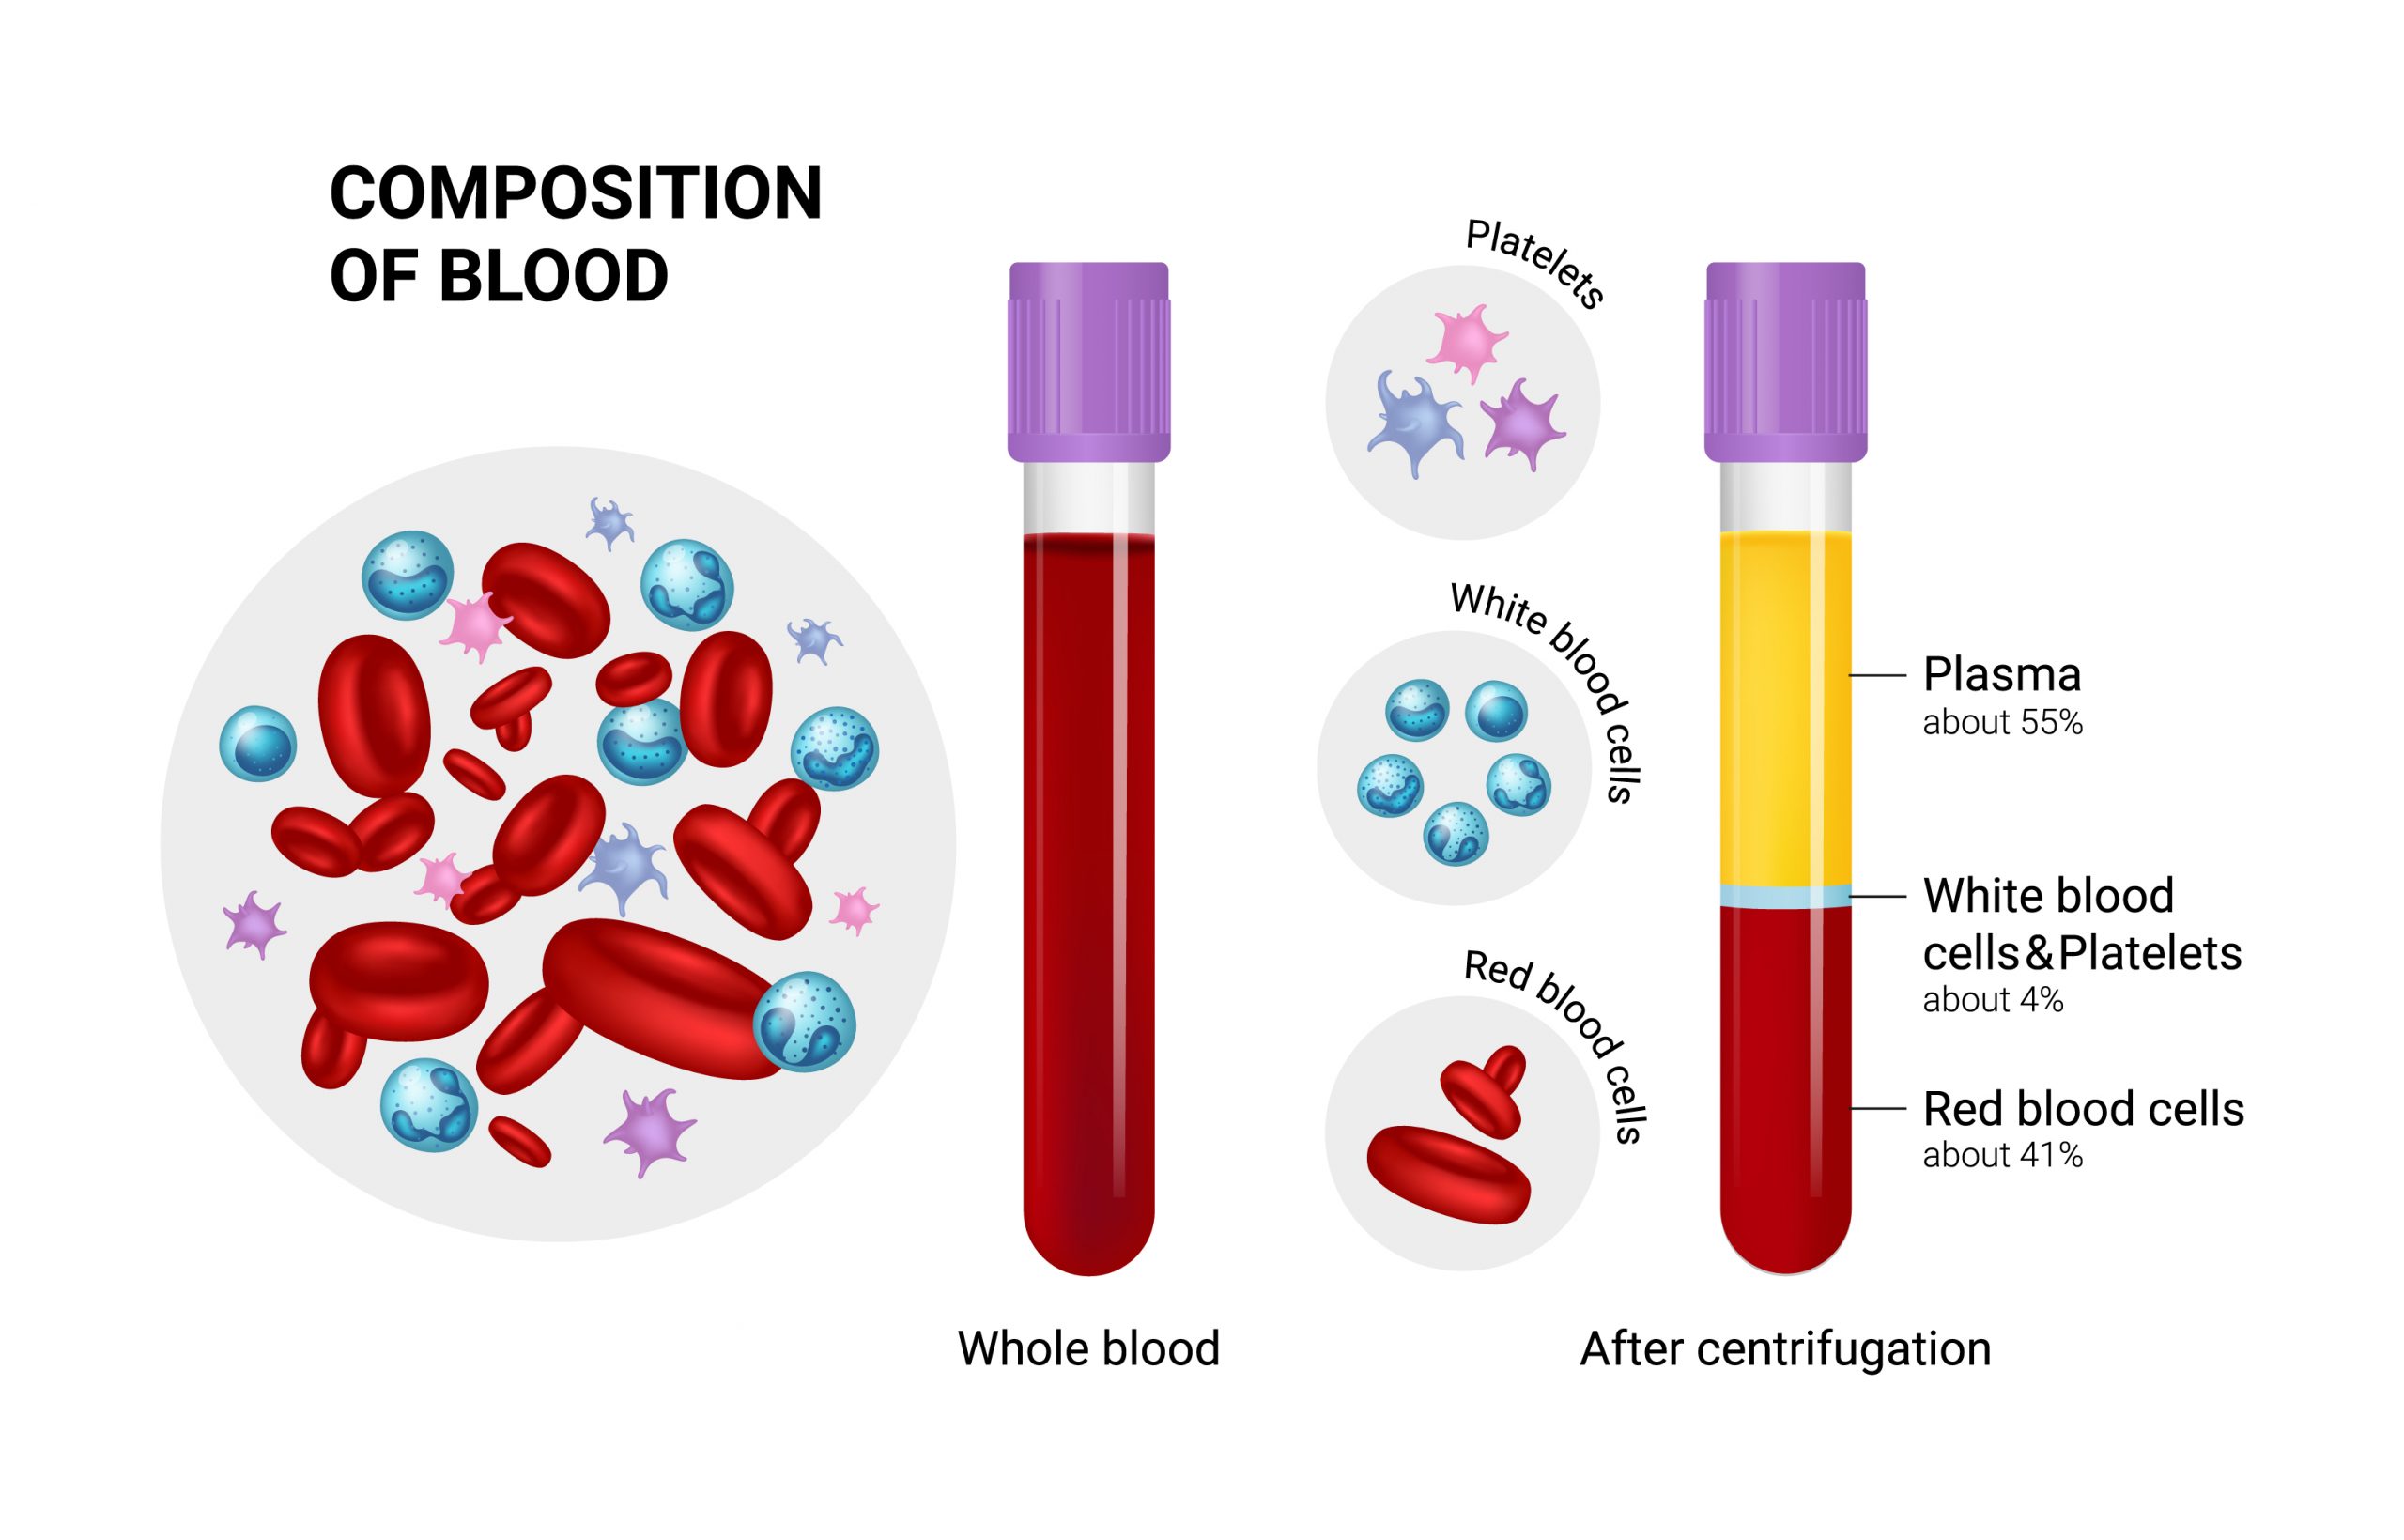 The composition of blood